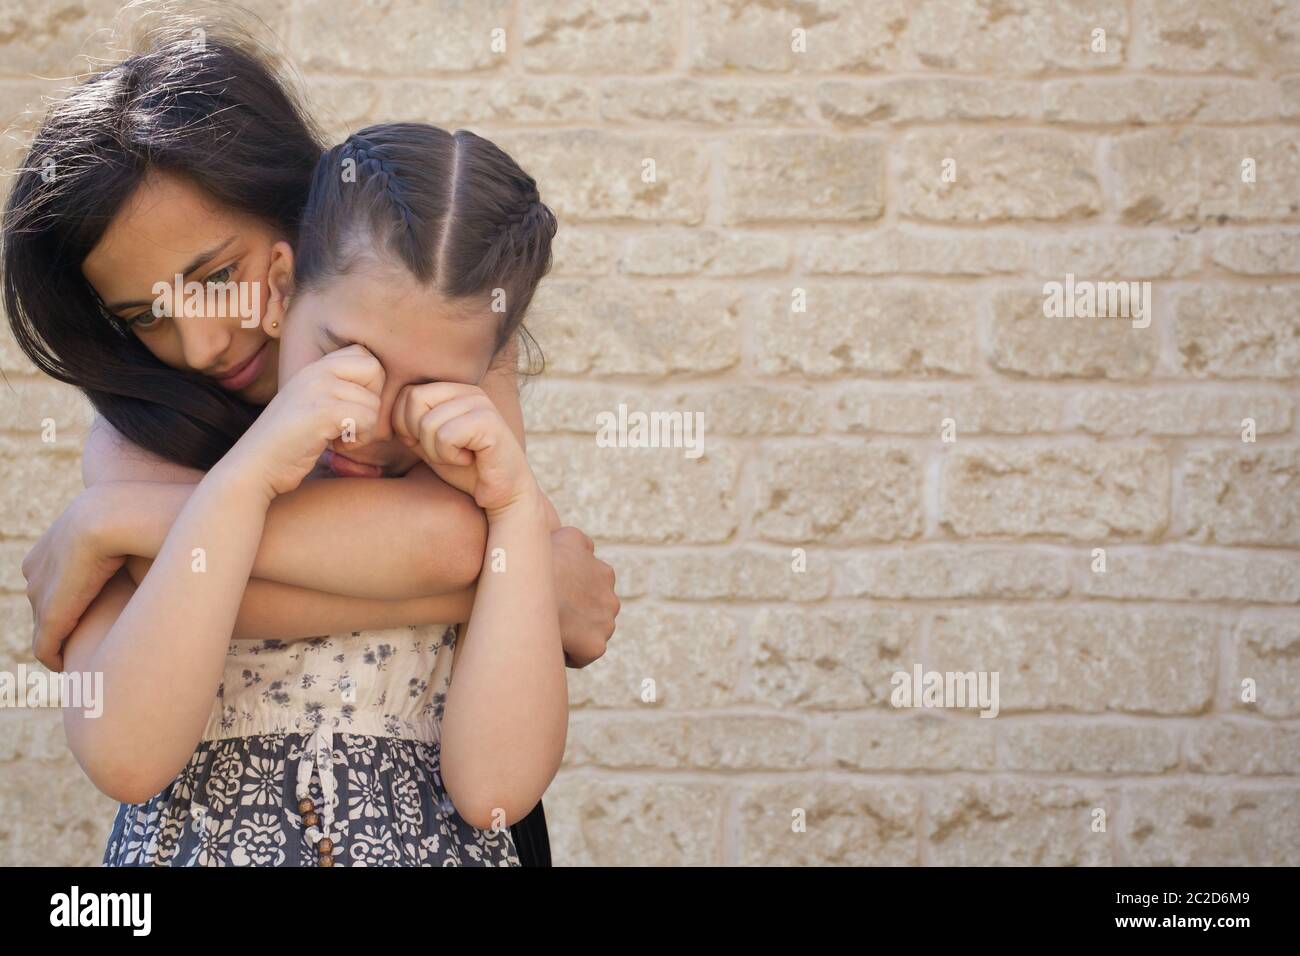 An older girl supports a young girl who is crying Stock Photo